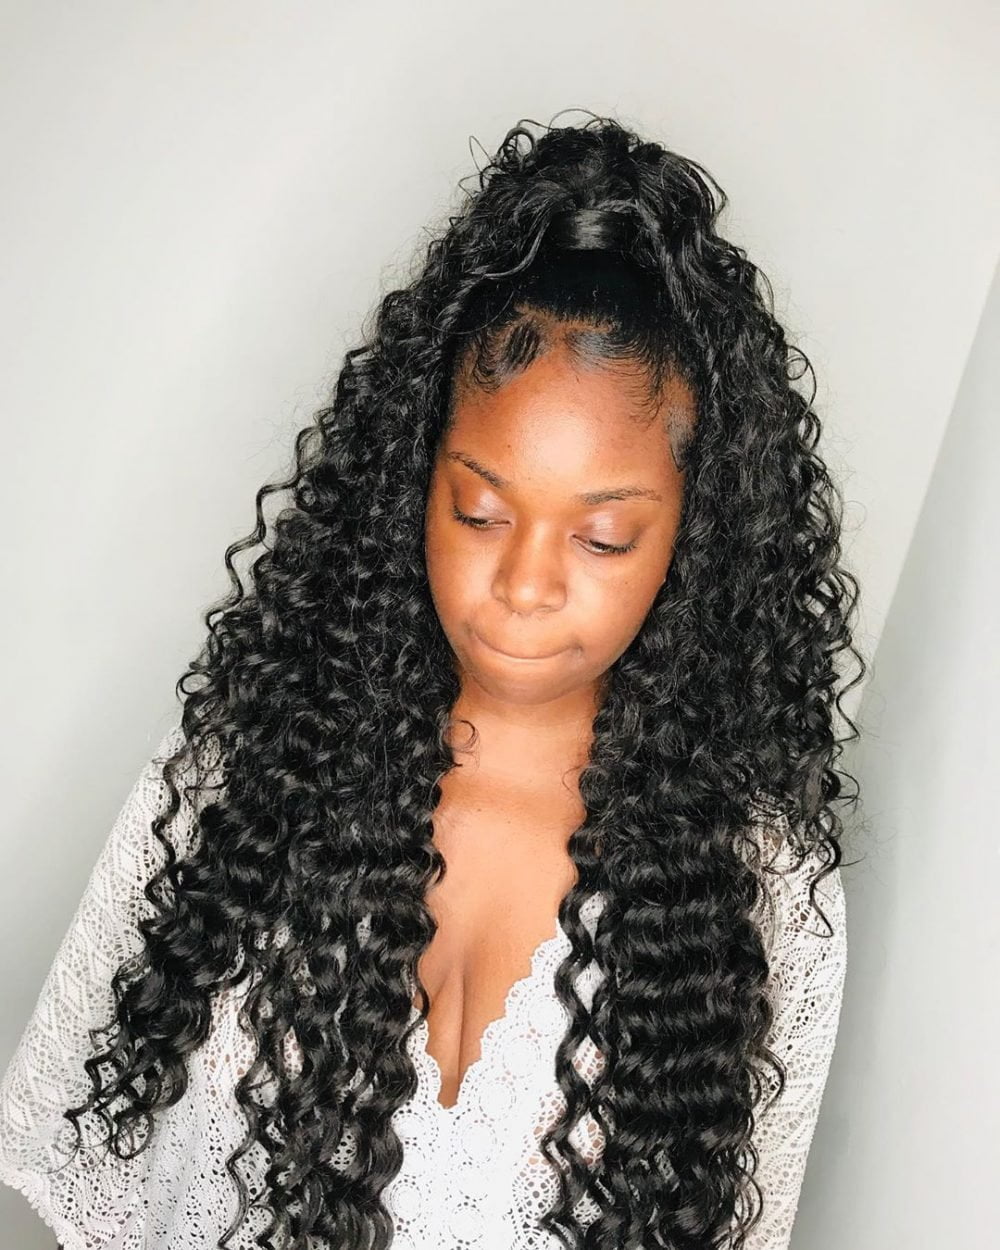 Adorable curly sew-in hairstyles